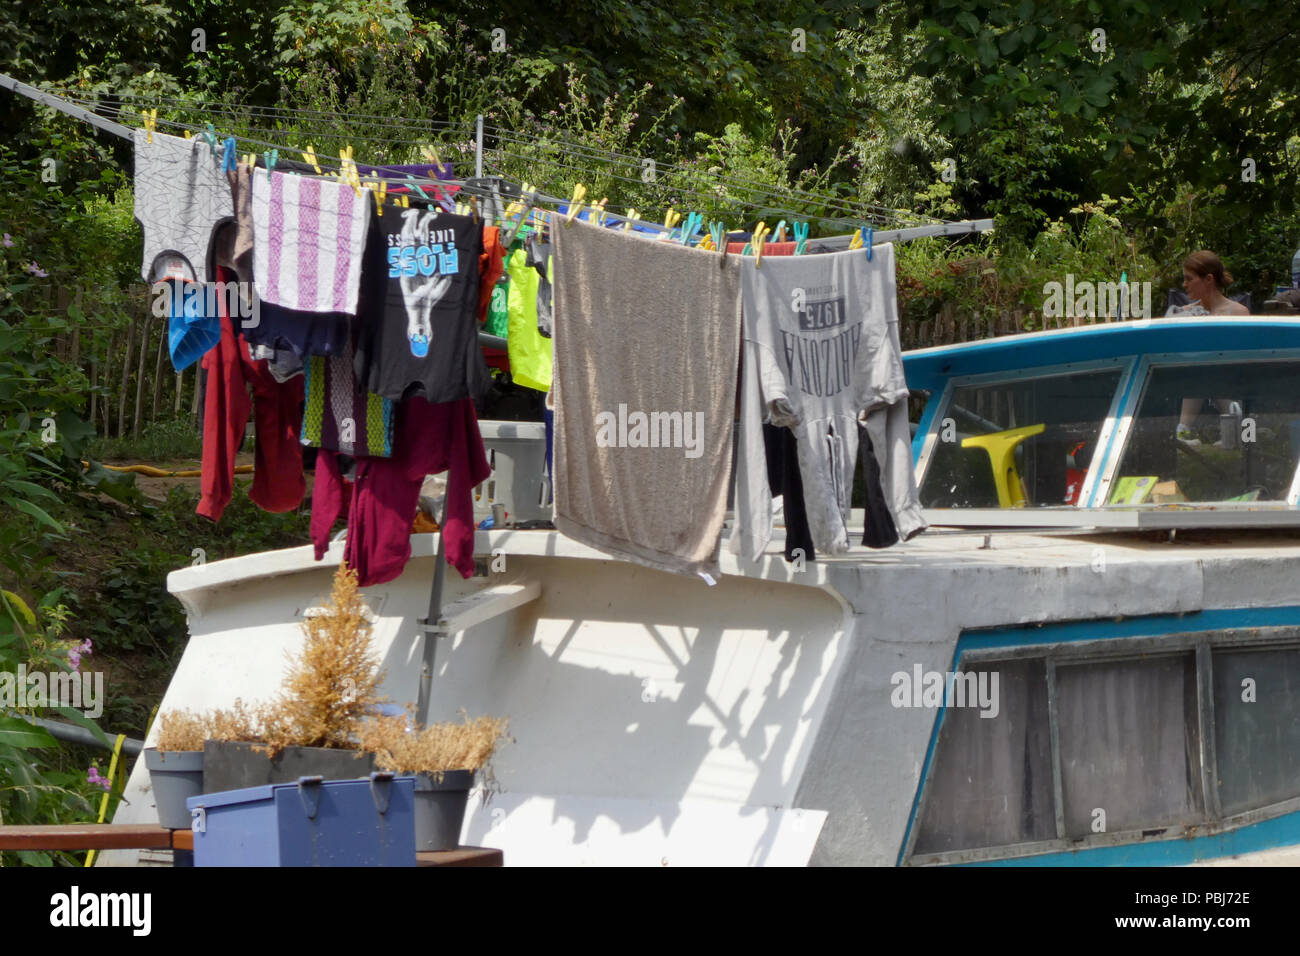 Laundry hanging out to dry on cabin cruiser, river Medway, Kent, England Stock Photo